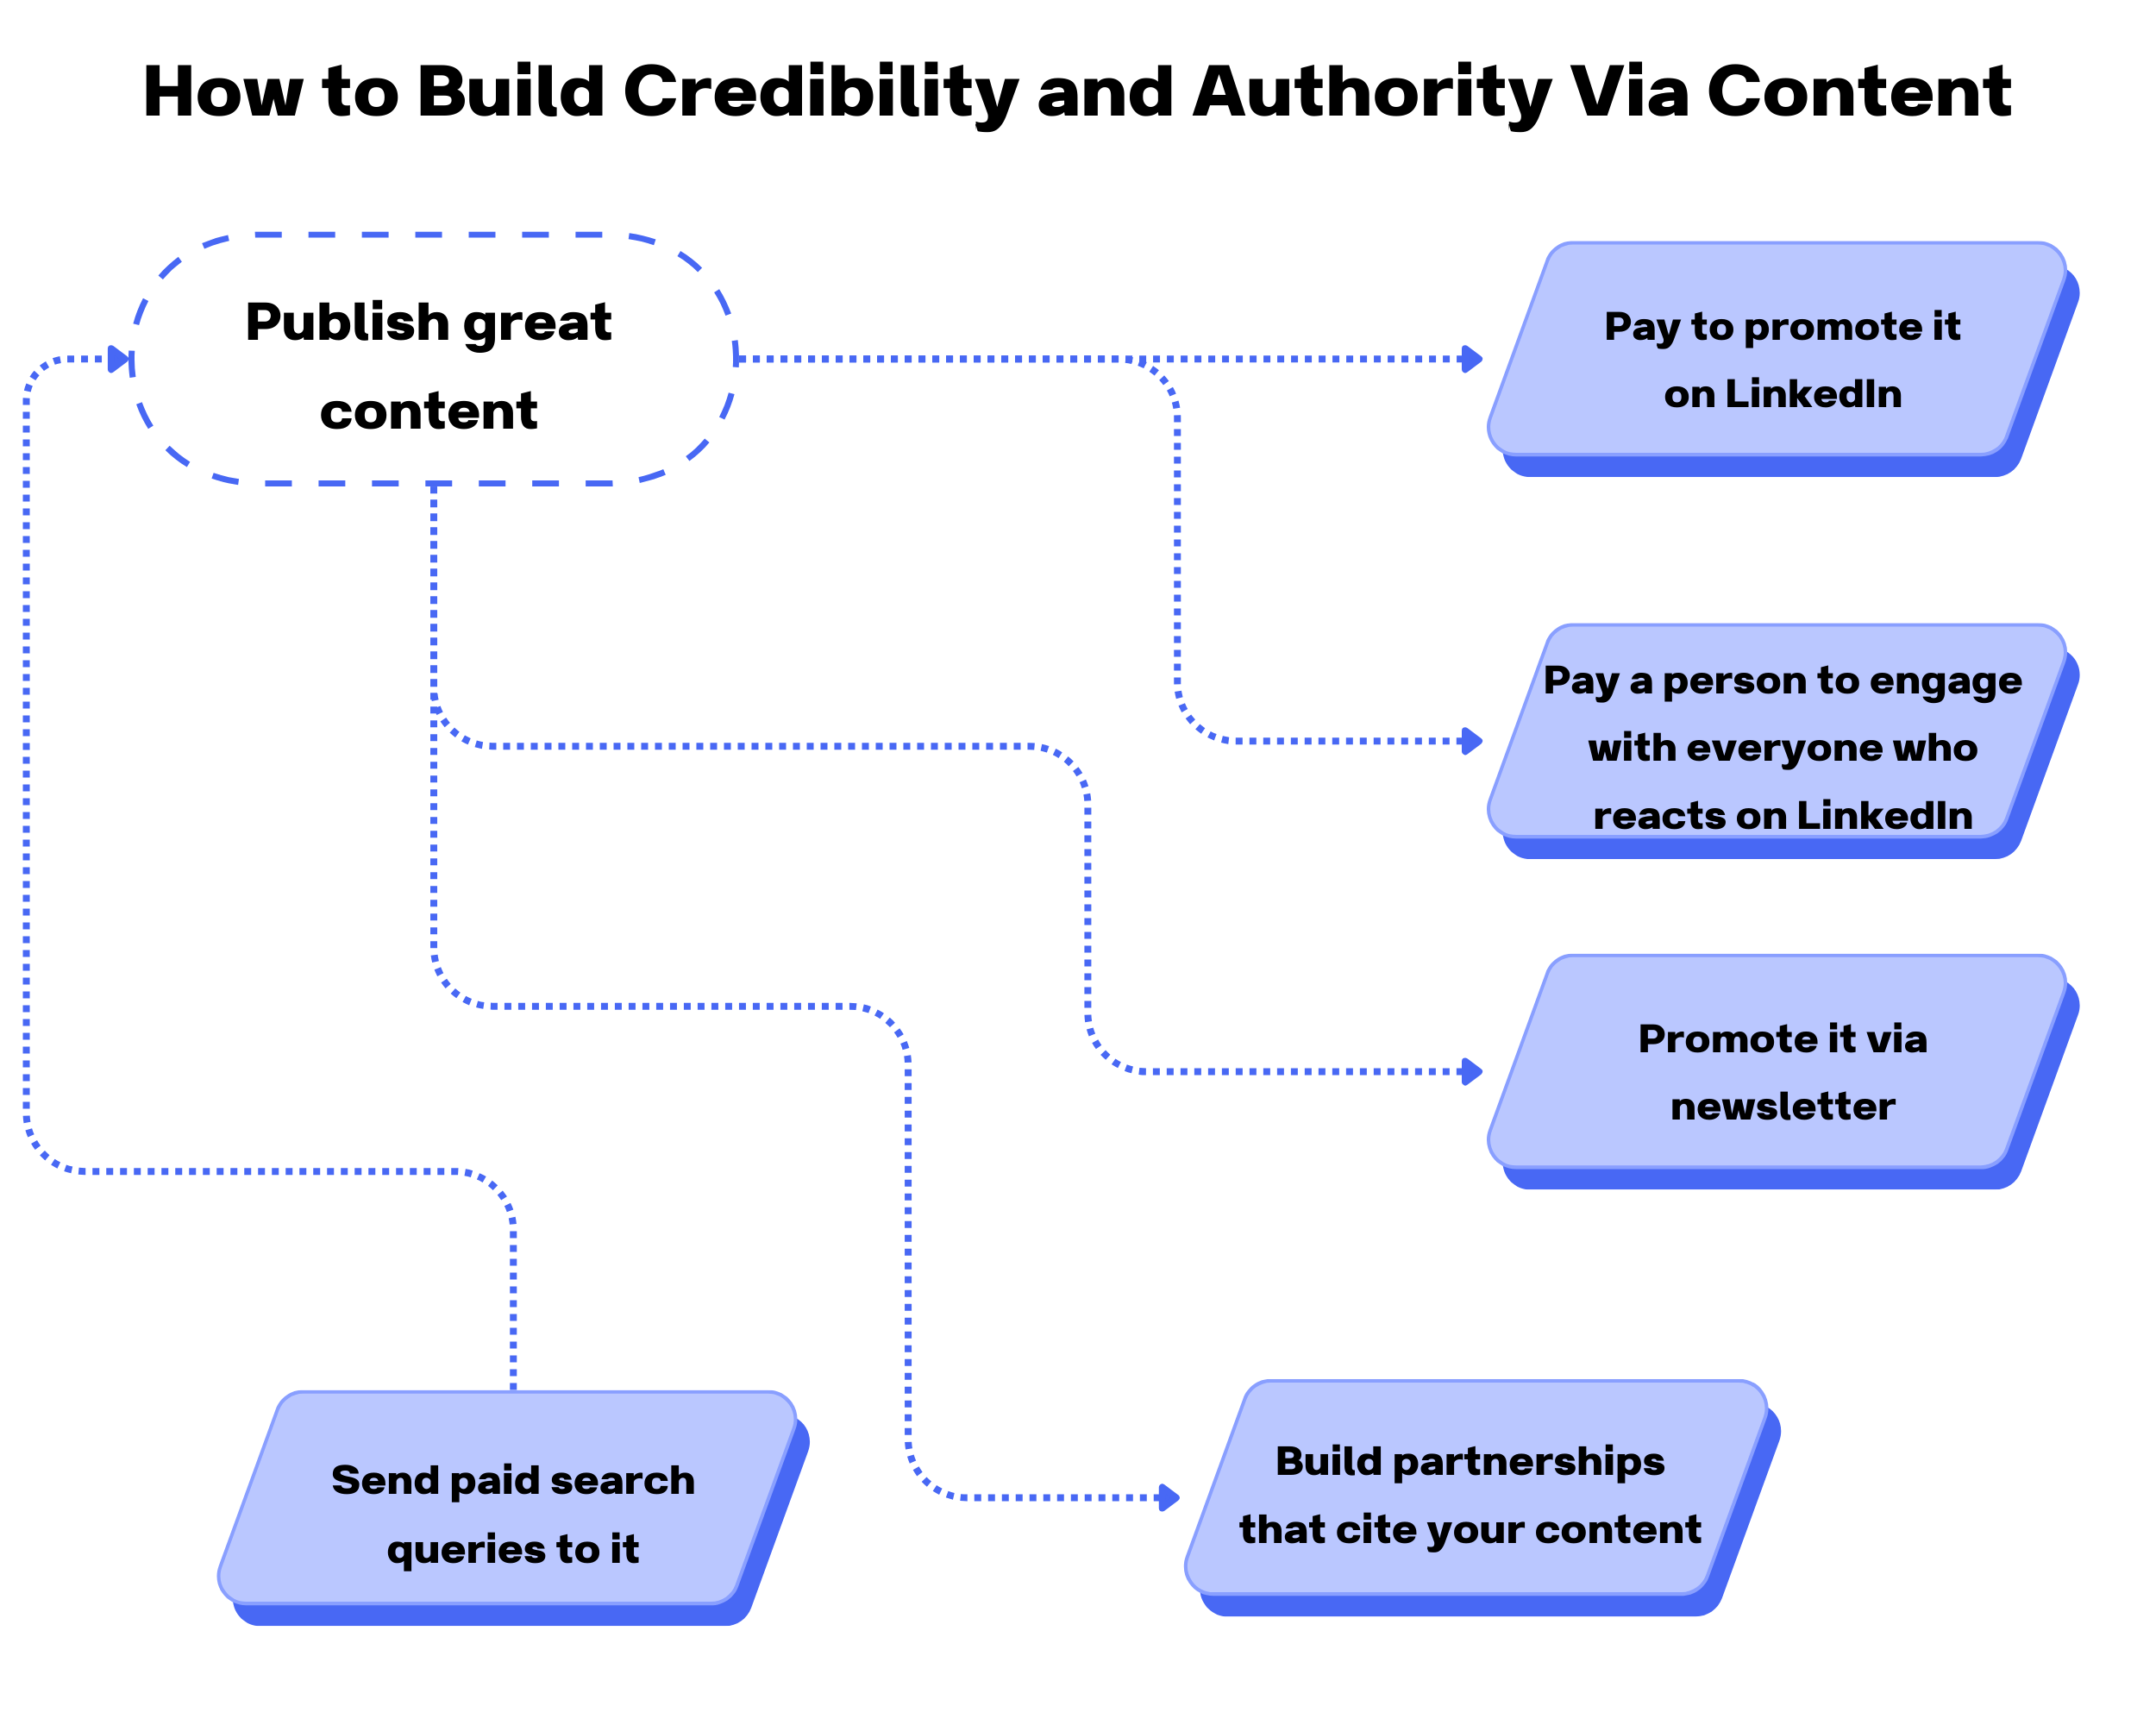 Diagram titled "How to Build Credibility and Authority Via Content" showing an oval with "publish great content" in it and arrows to various promotion strategies listed in the above bulleted list.